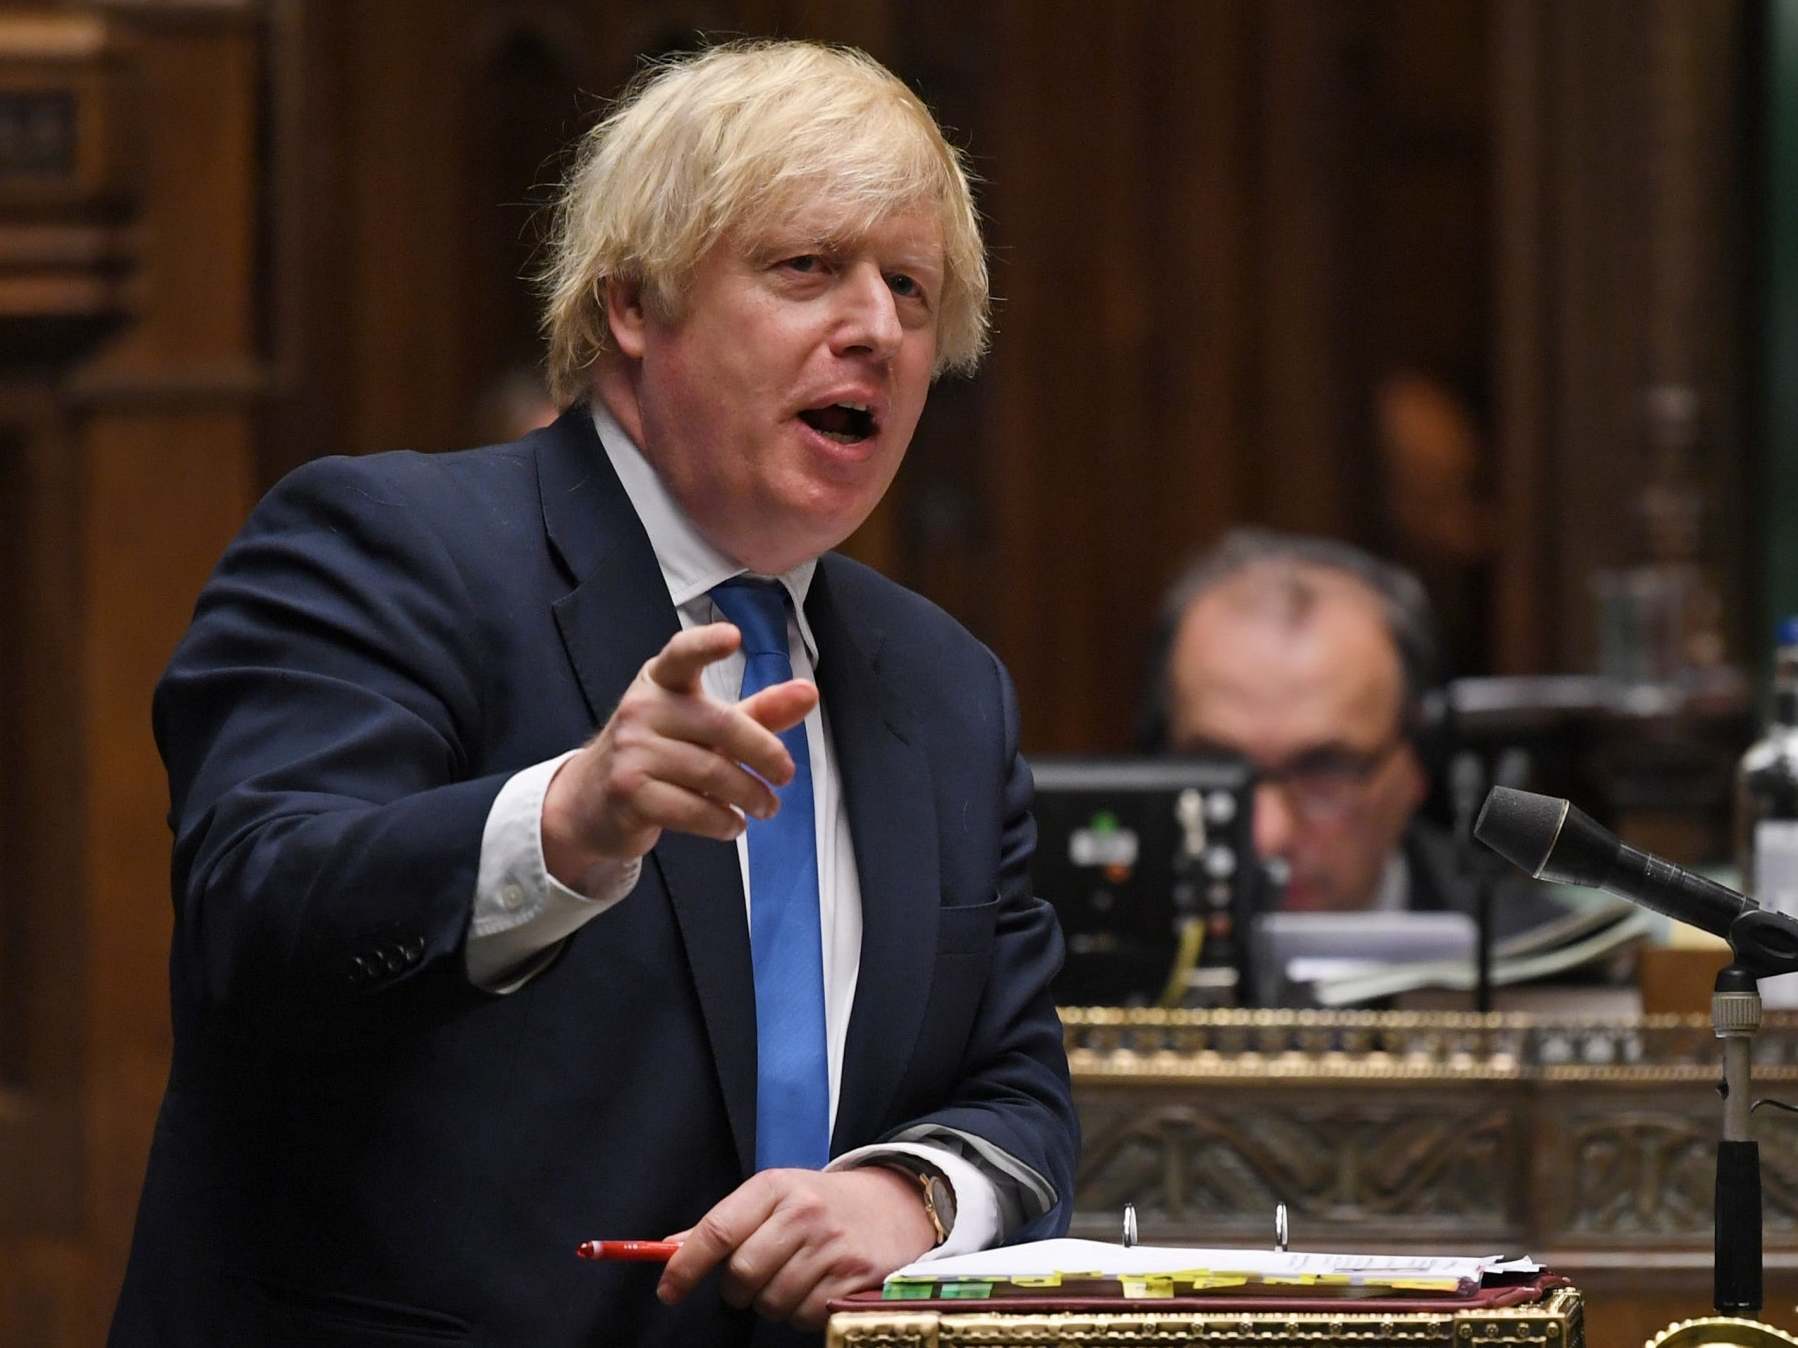 Boris Johnson speaking during the Prime Ministers Questions in the House of Commons Chamber, 17 June 2020